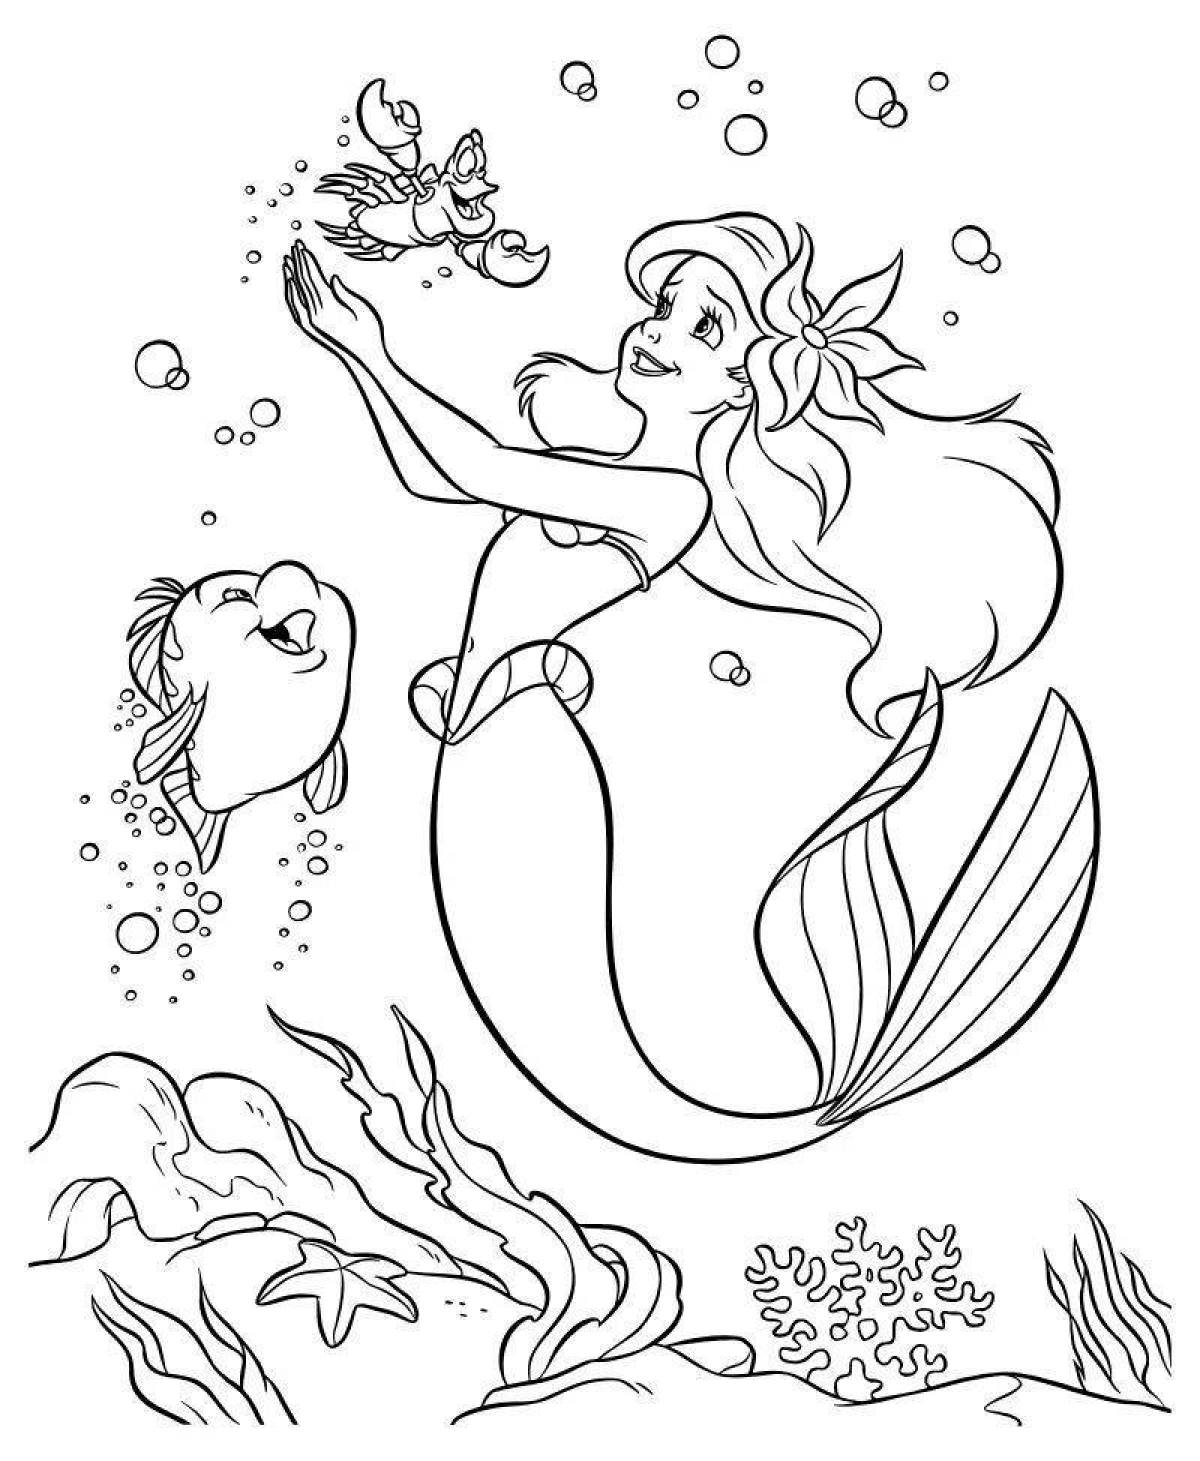 Bright little mermaid coloring book for children 4-5 years old